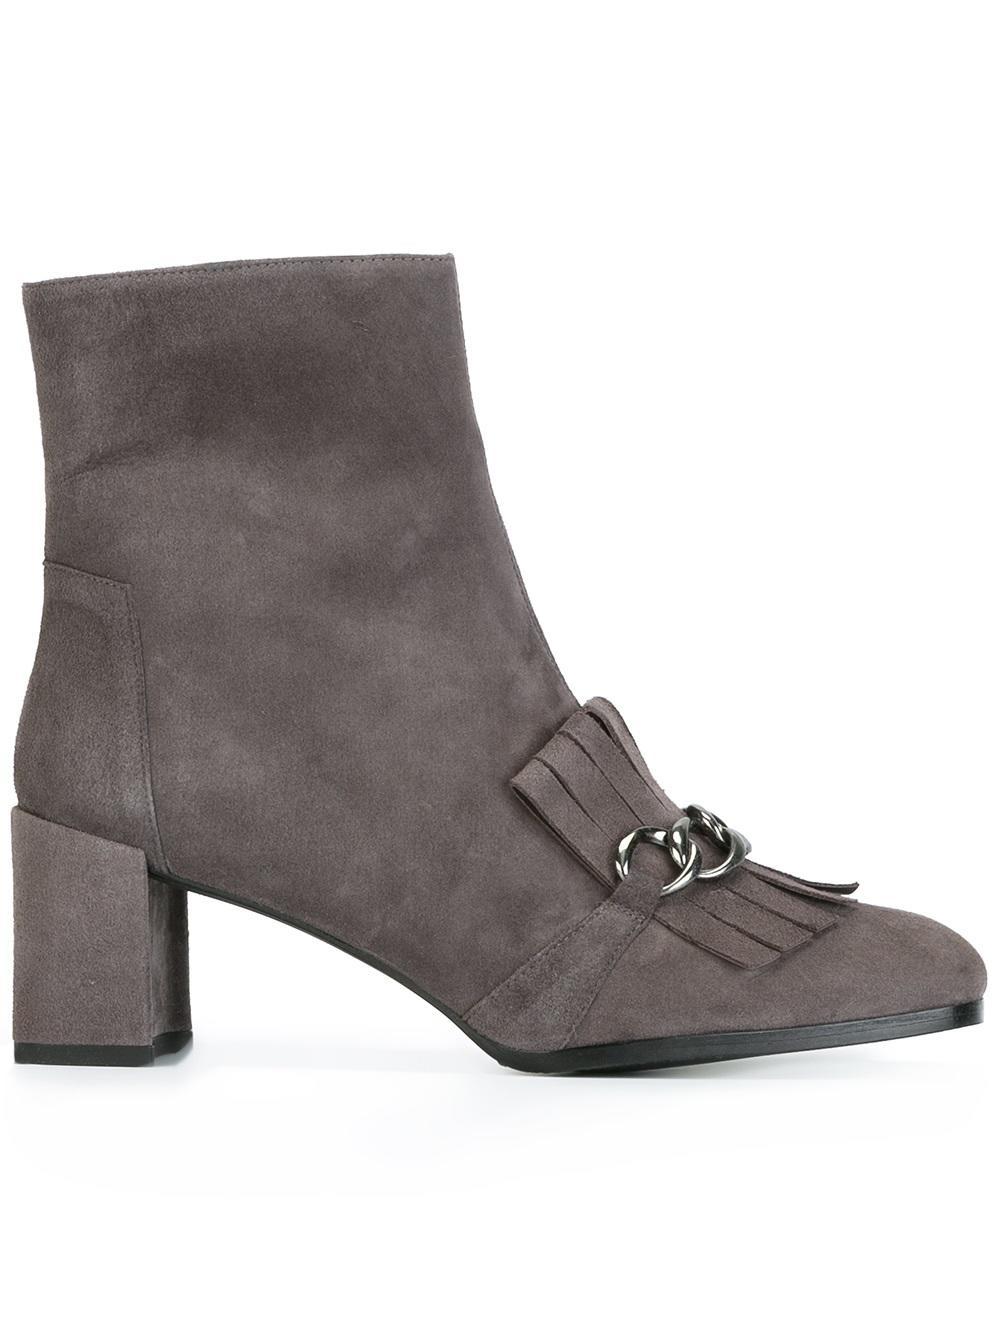 Lyst - Stuart Weitzman Ringtone Suede Ankle Boots in Gray